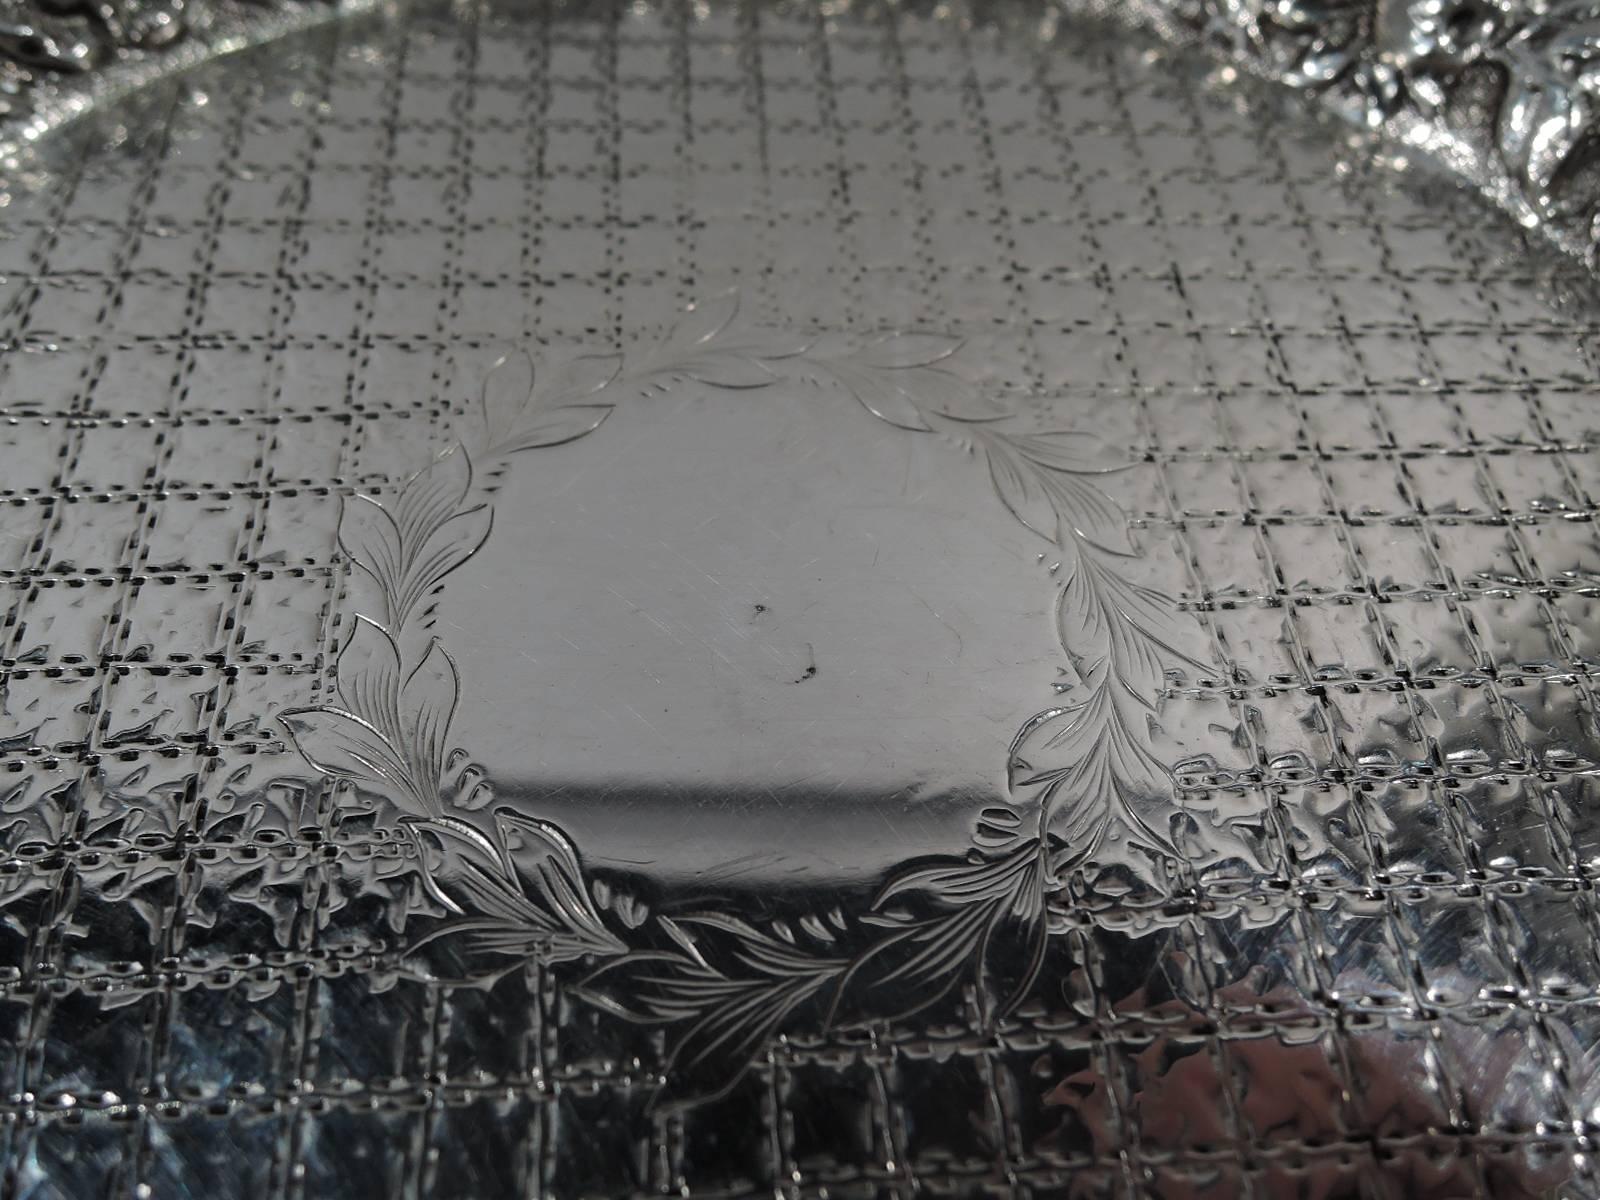 Repoussé Baltimore Repousse Sterling Silver Salver Tray by Kirk